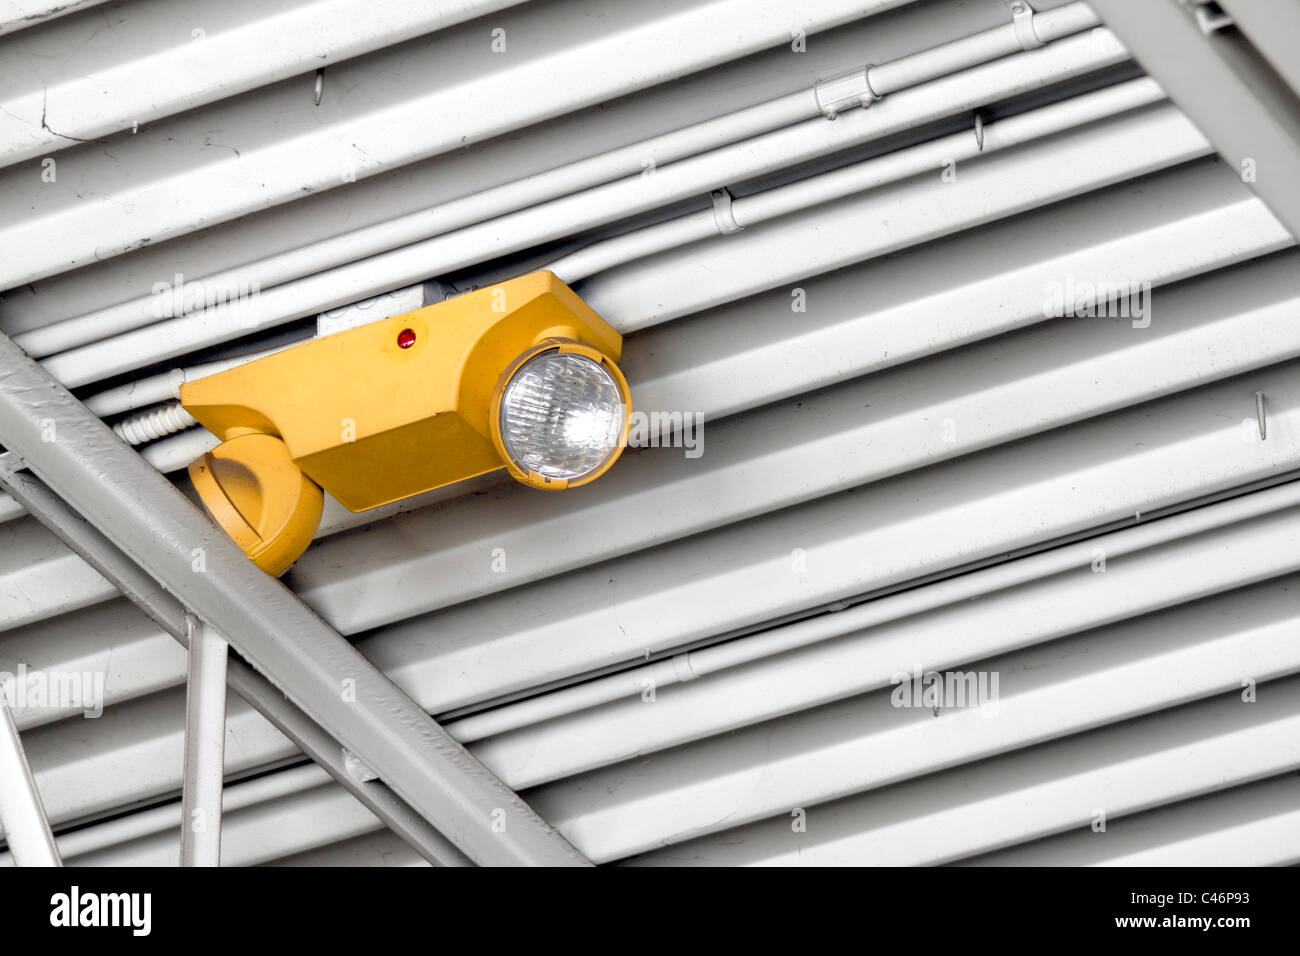 Emergency lighting on ceiling of industrial building Stock Photo